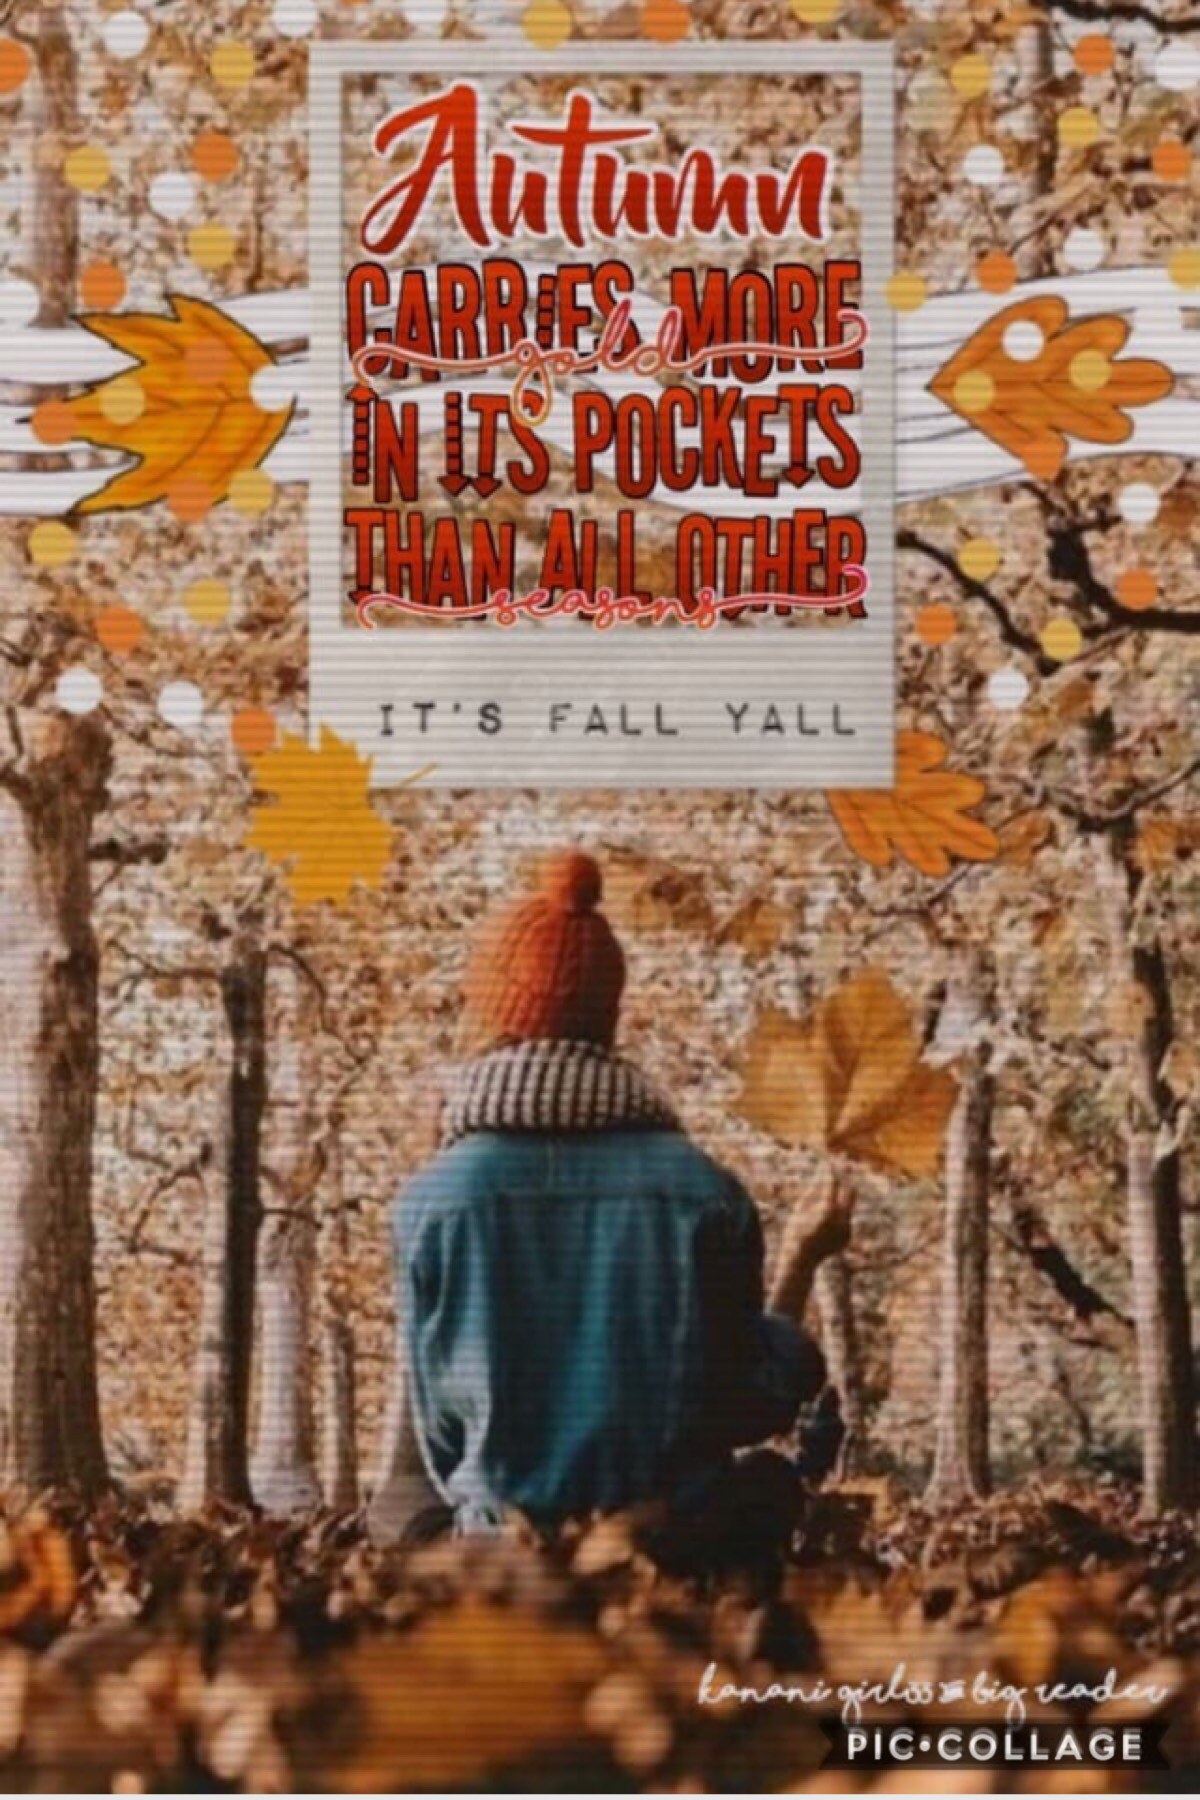 Collab with legendary kanani_girl33 🍁
She did the text and I did the background and pngs!🍂
It’s fall y’all! Starting off the season with this first fall post! Hope y’all have a wonderful day!😊✨💖